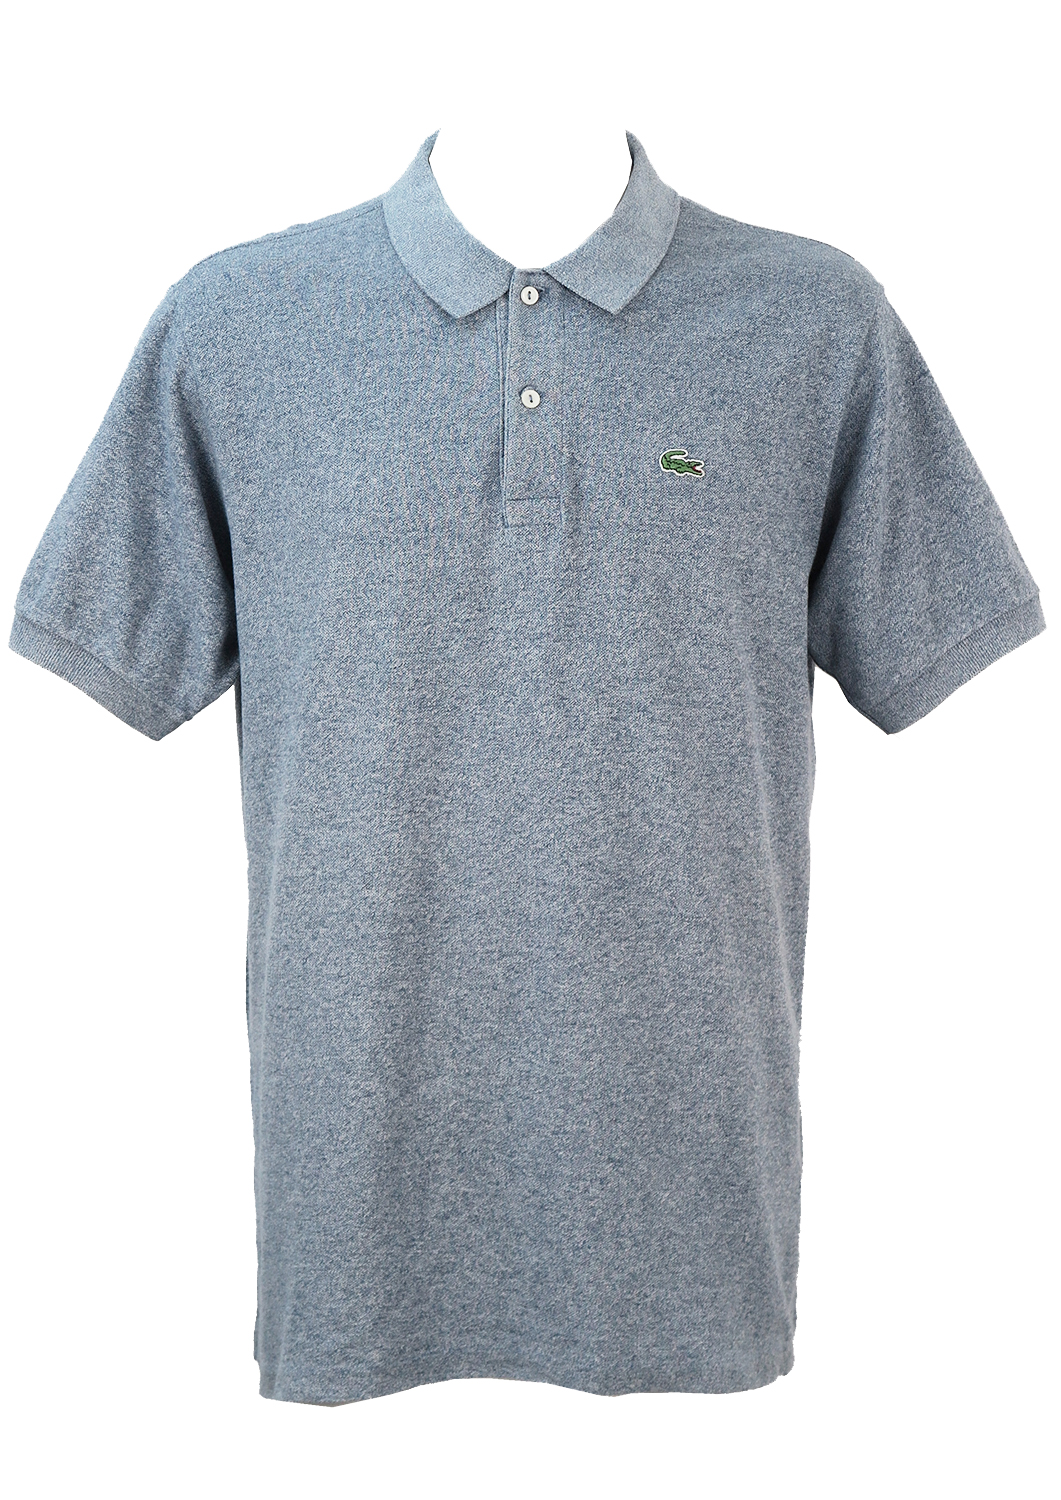 Lacoste Mottled Blue and White Polo Shirt - XL | Reign Vintage